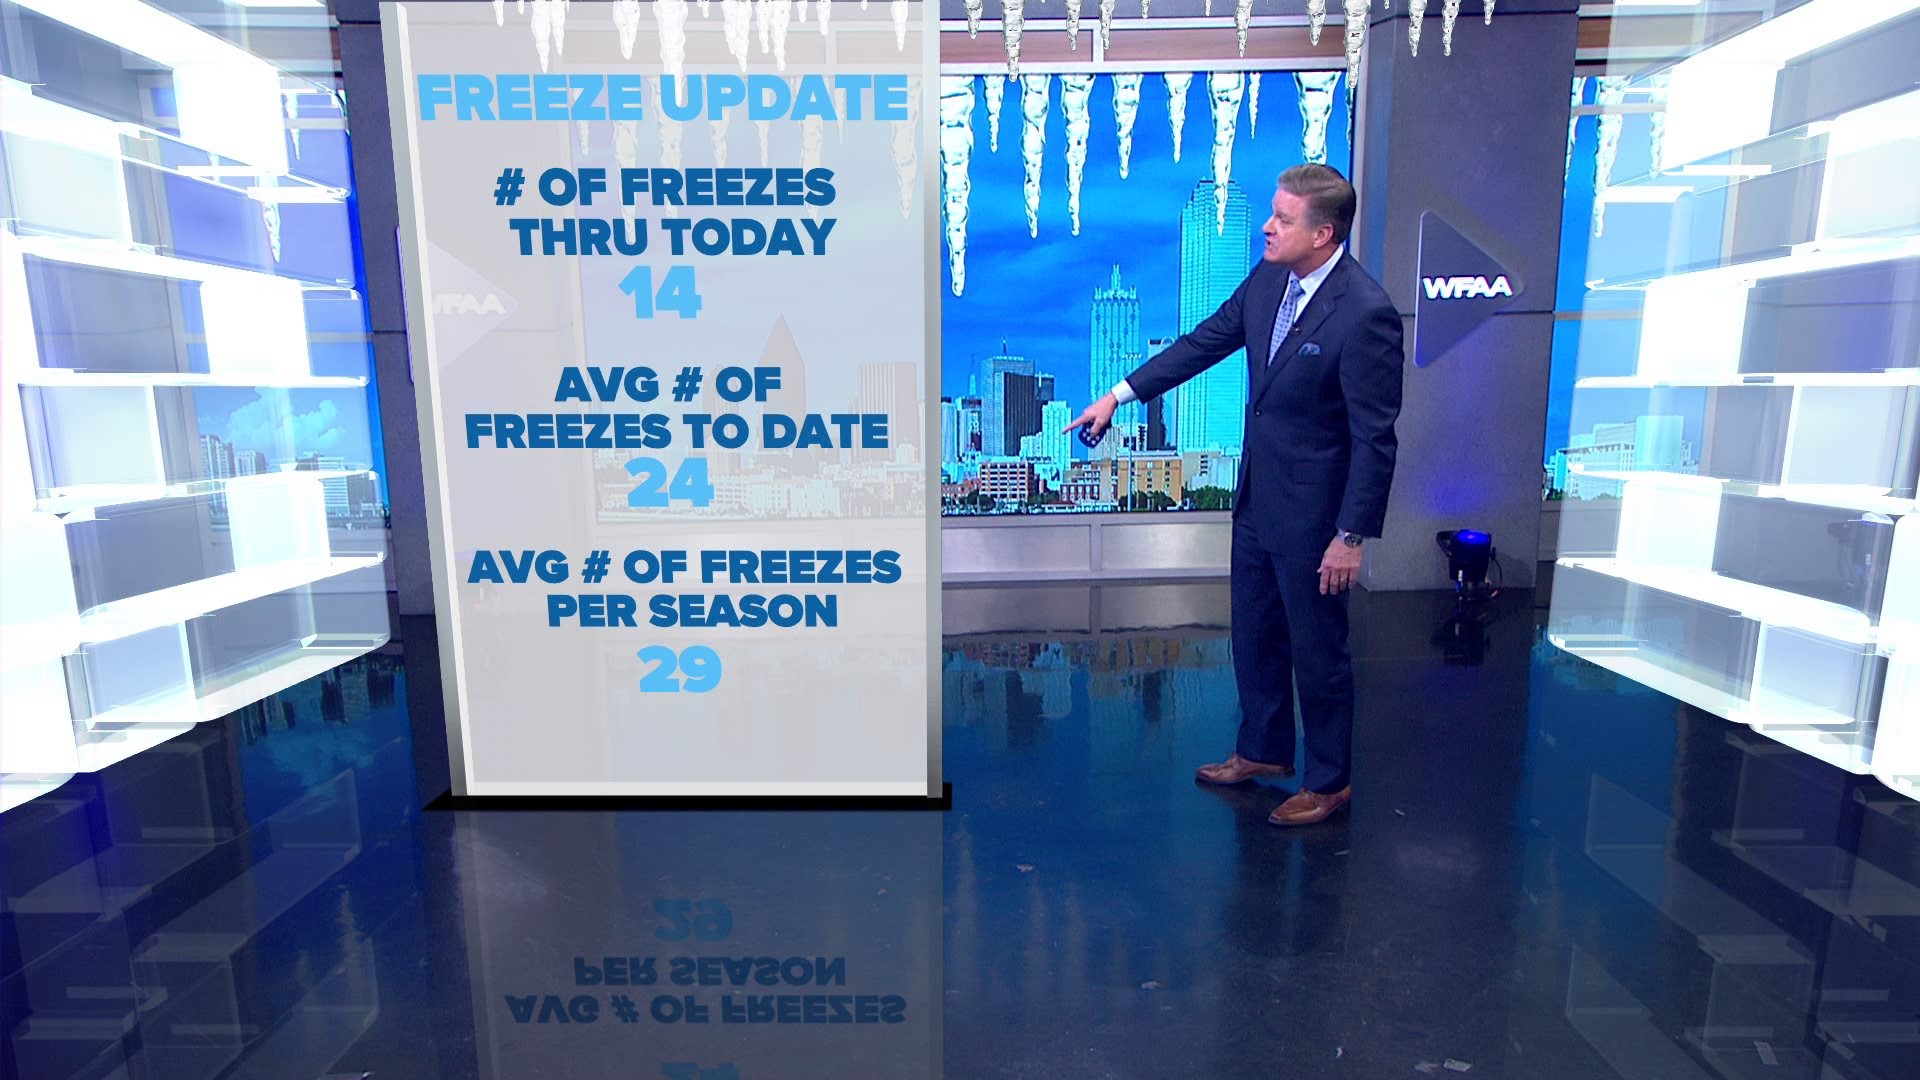 Despite recent warm temperatures, there are a few more freezes expected this season.